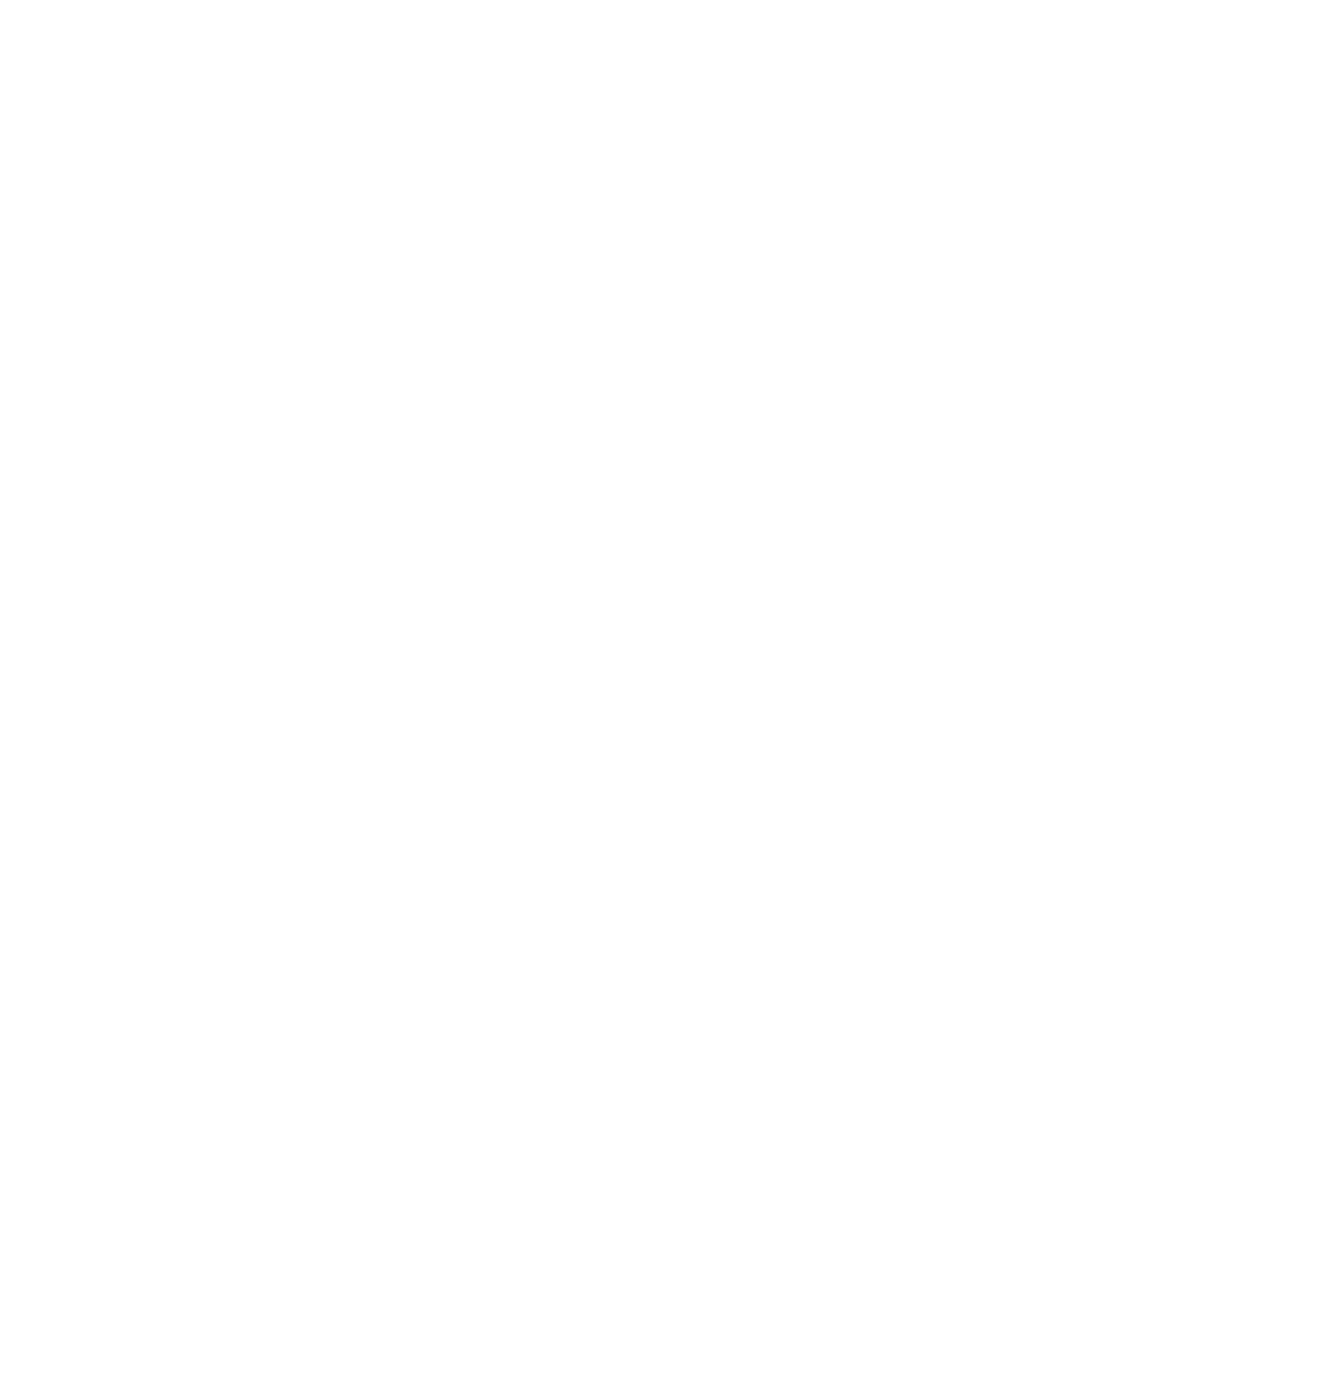 The Rest Is Up To You: Melbourne Fringe Festival 1982-2062